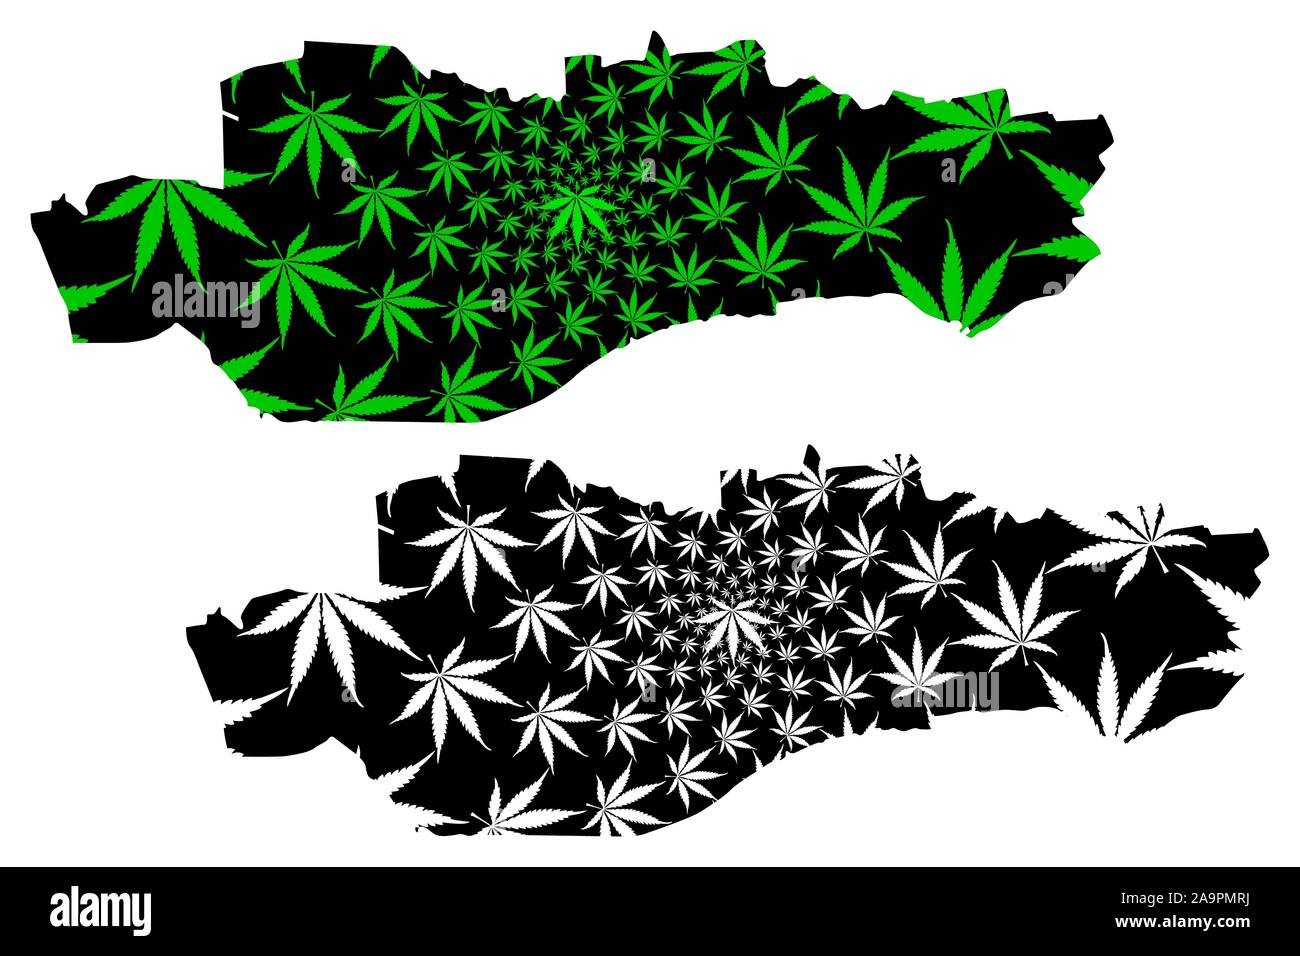 Dundee (United Kingdom, Scotland, Local government in Scotland) map is designed cannabis leaf green and black, City and council area Dundee map made o Stock Vector